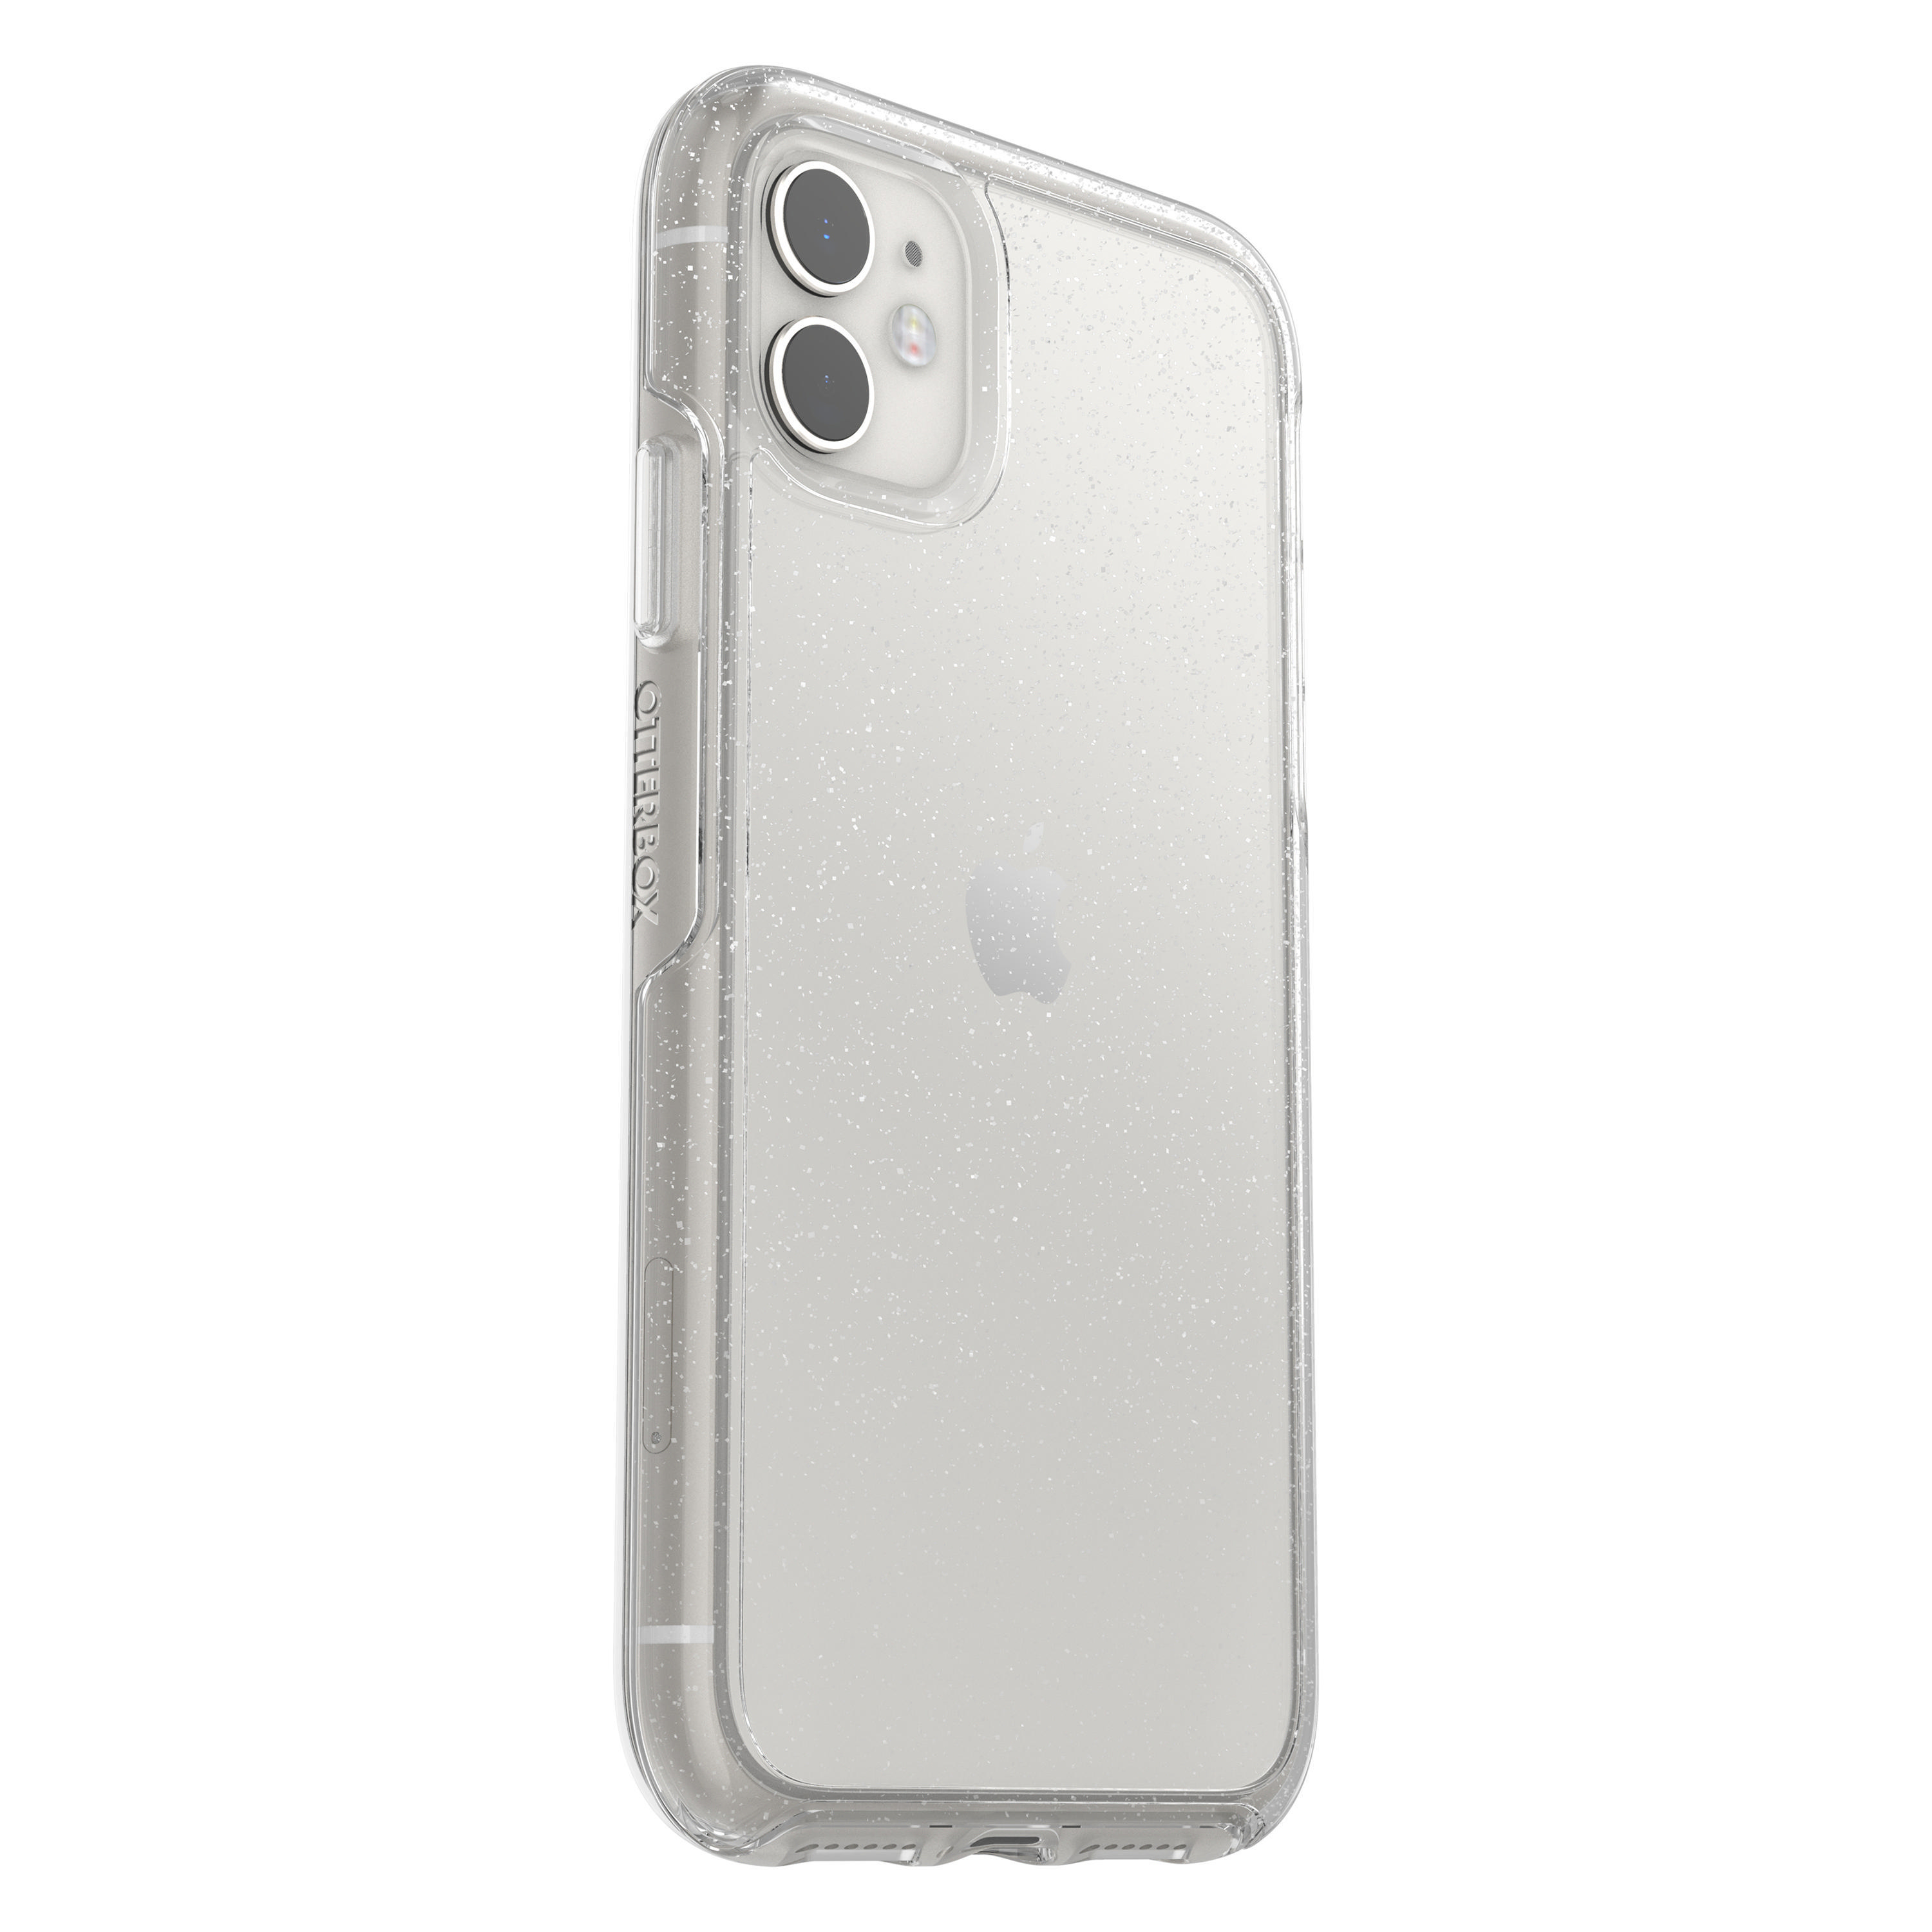 OTTERBOX Symmetry, Apple, Backcover, iPhone 11, Transparent